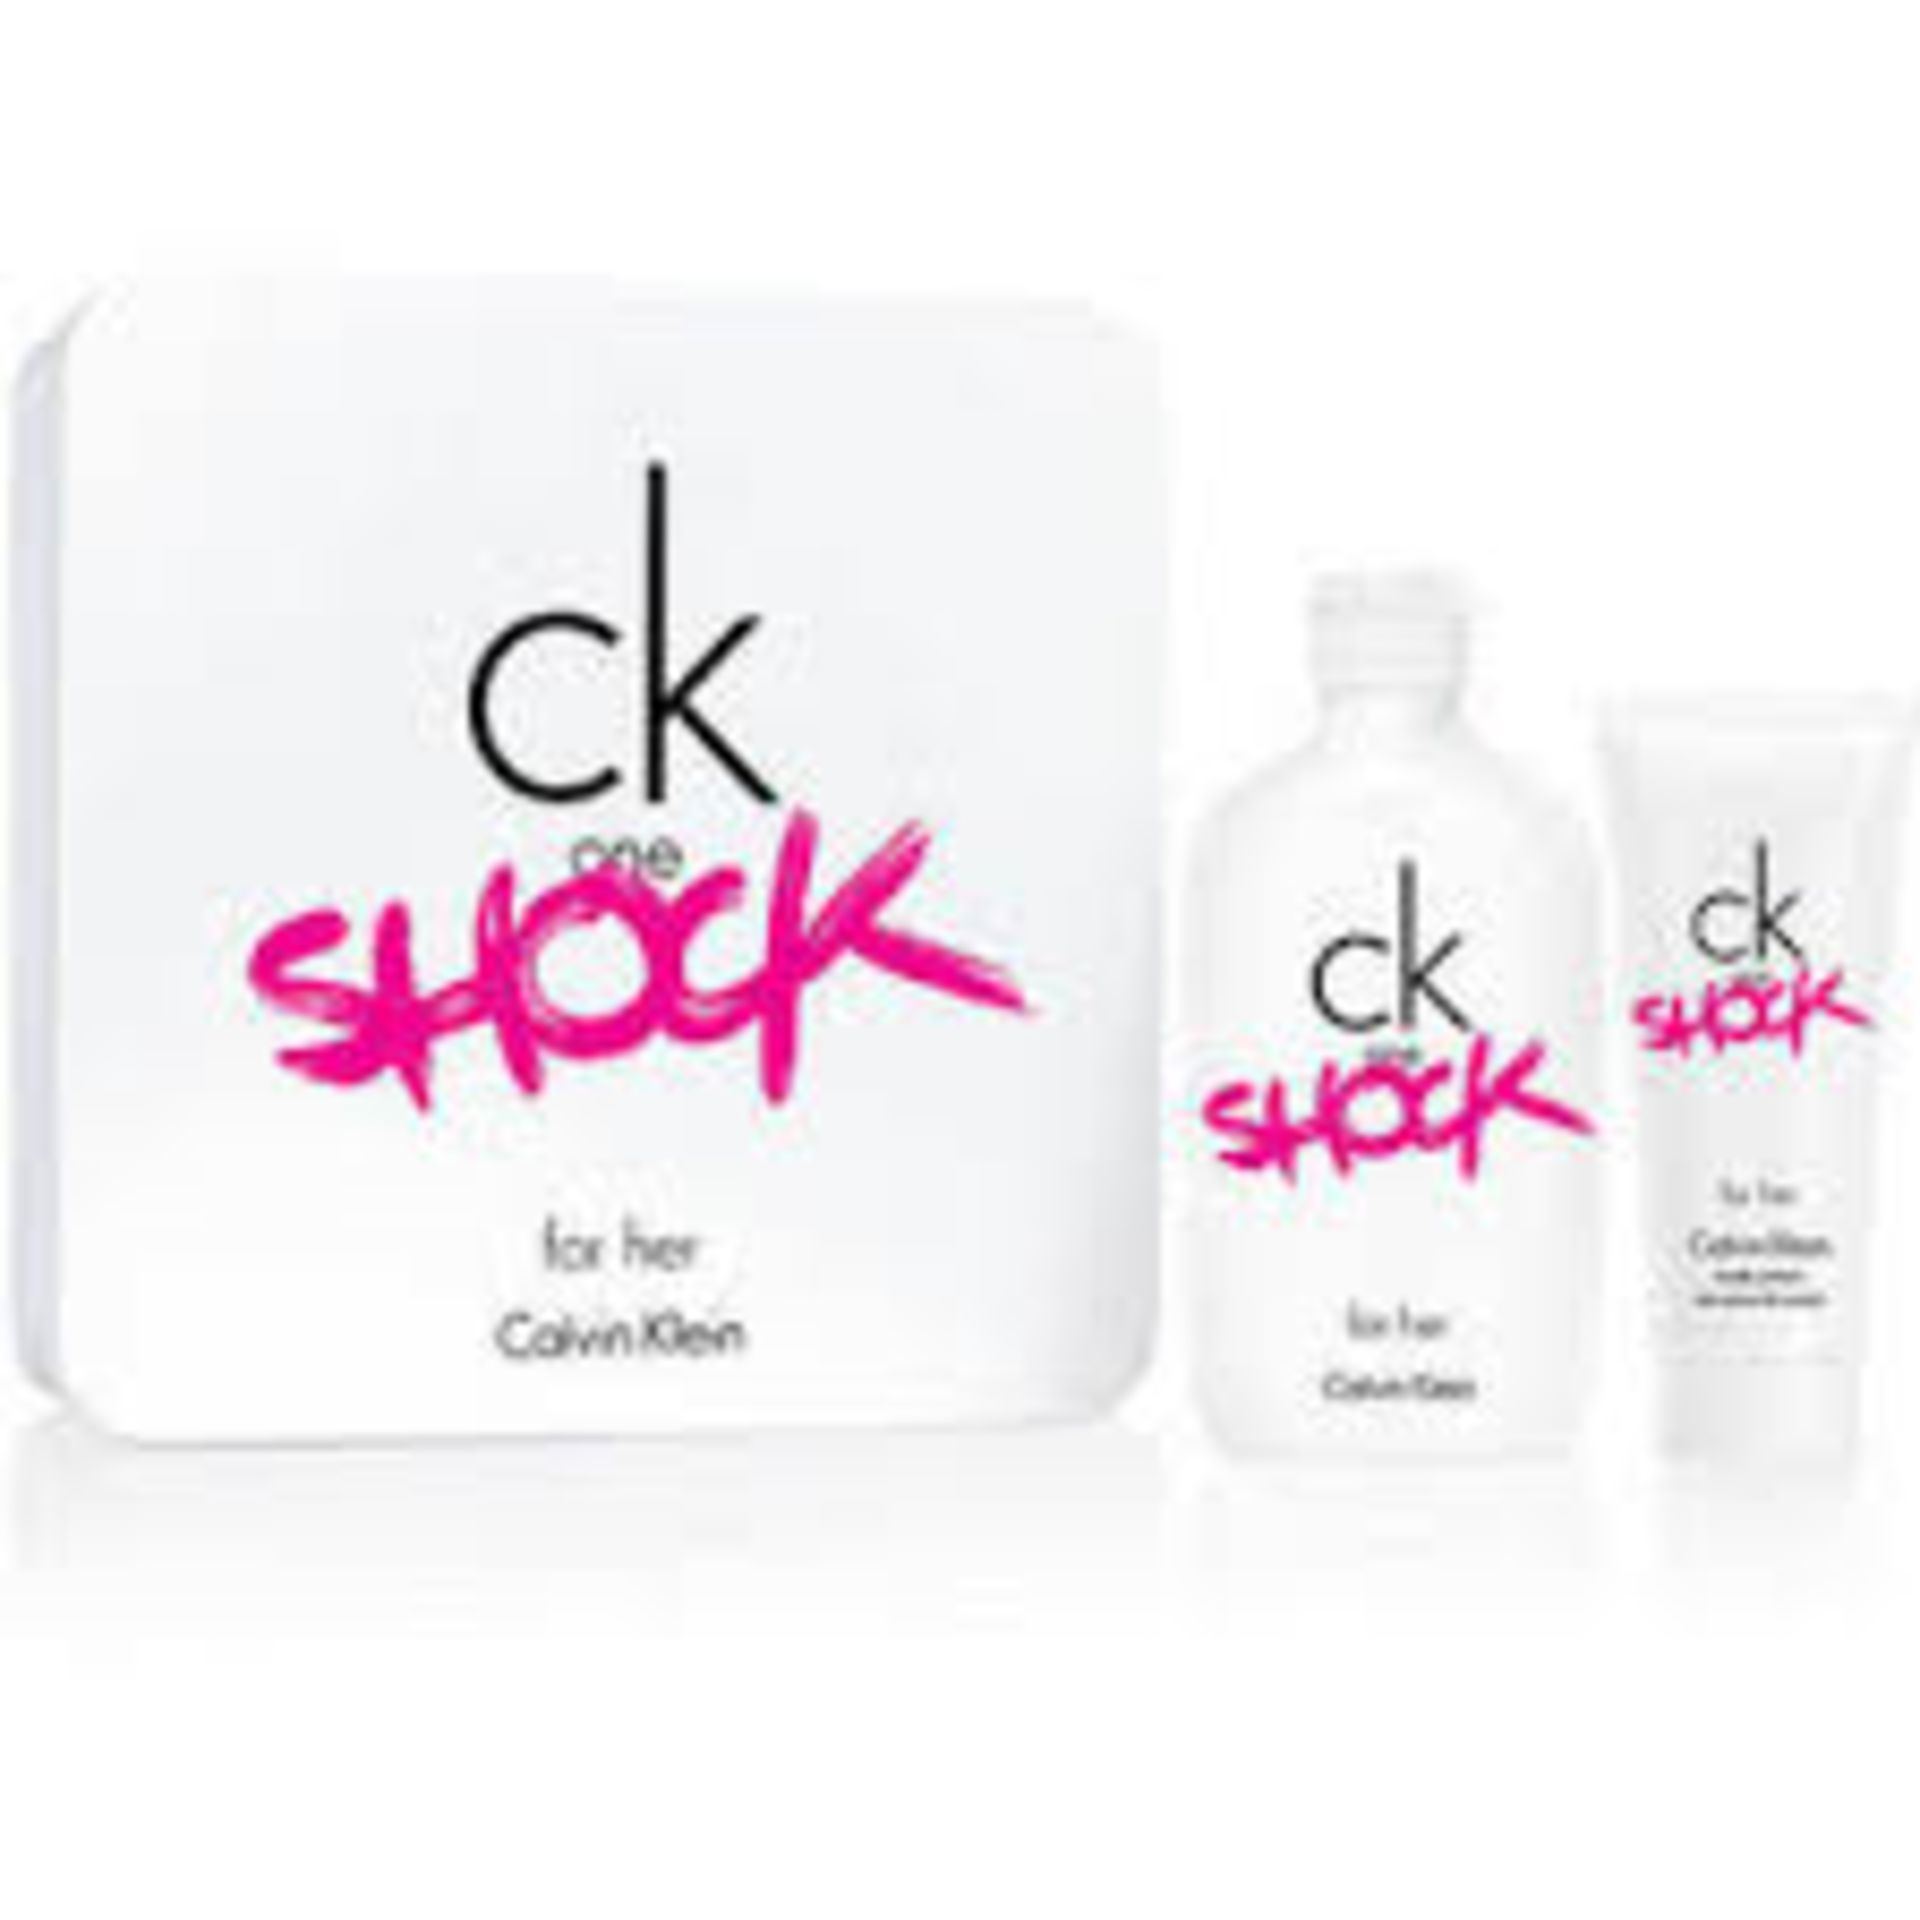 V Brand New Calvin Klein - CK one Shock for her EDT spray and body lotion boxed gift set RP £35.40